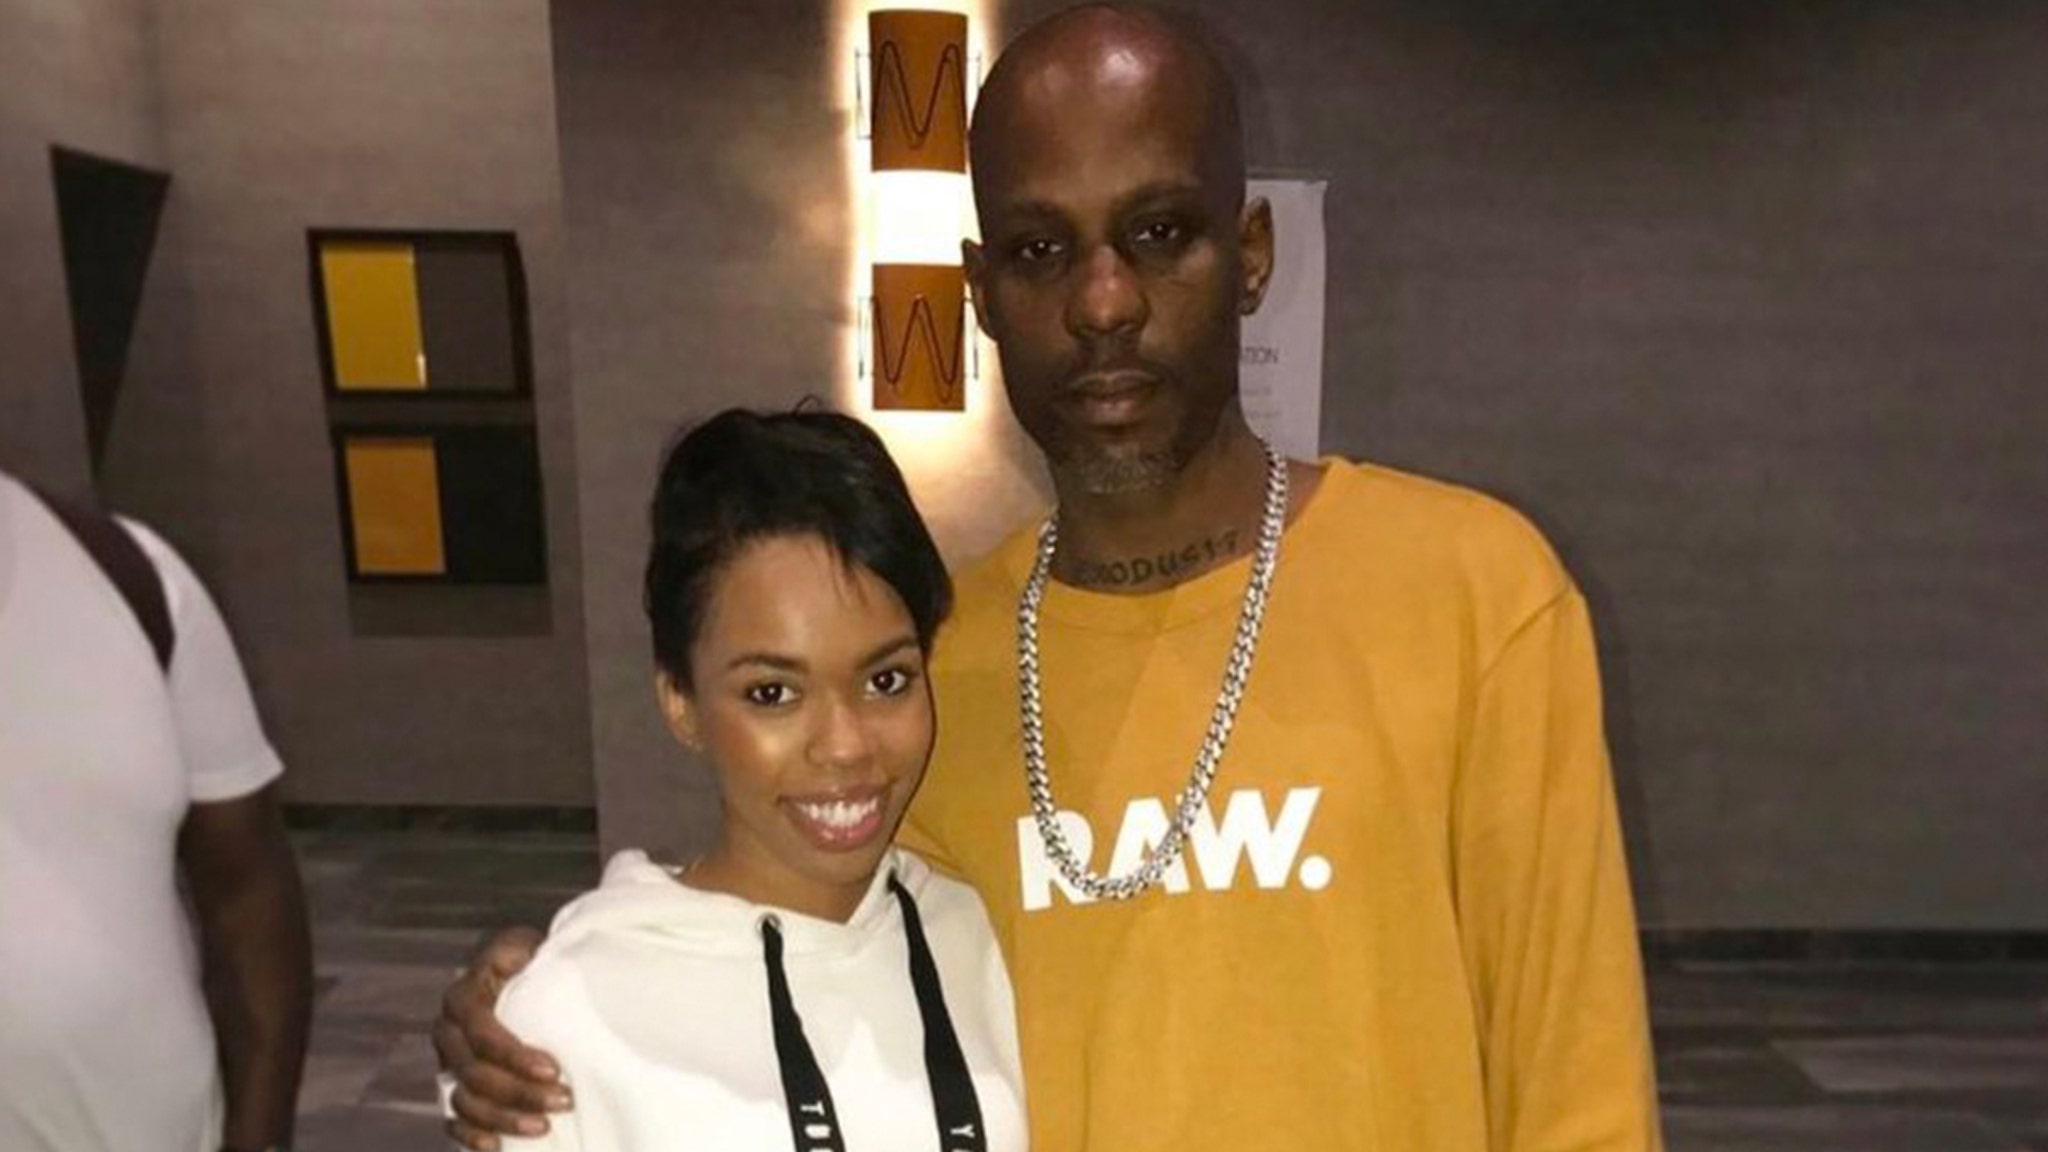 DMX inspired by a fan to forgive his father who died of addiction